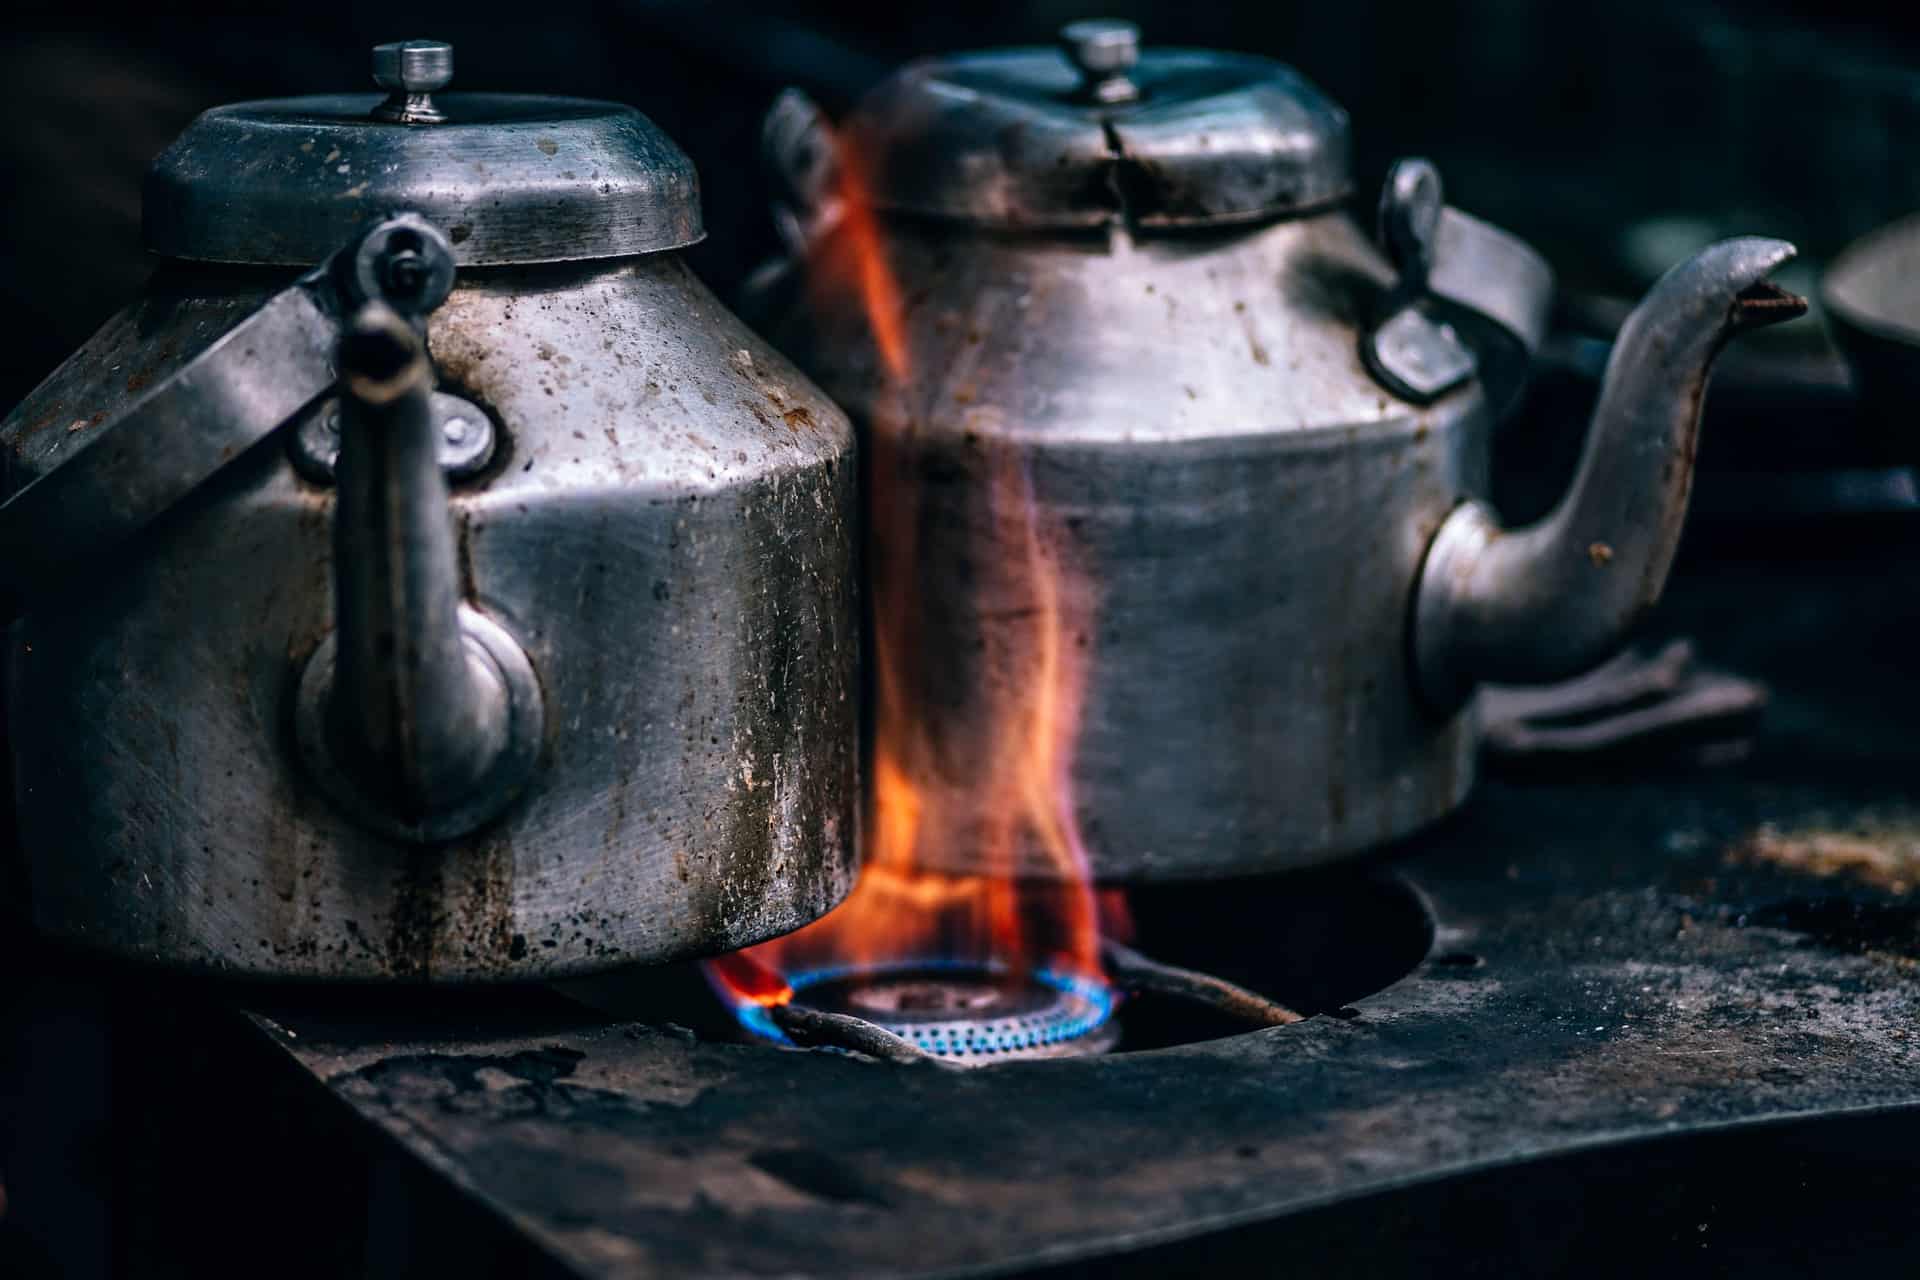 two kettles on gas stove